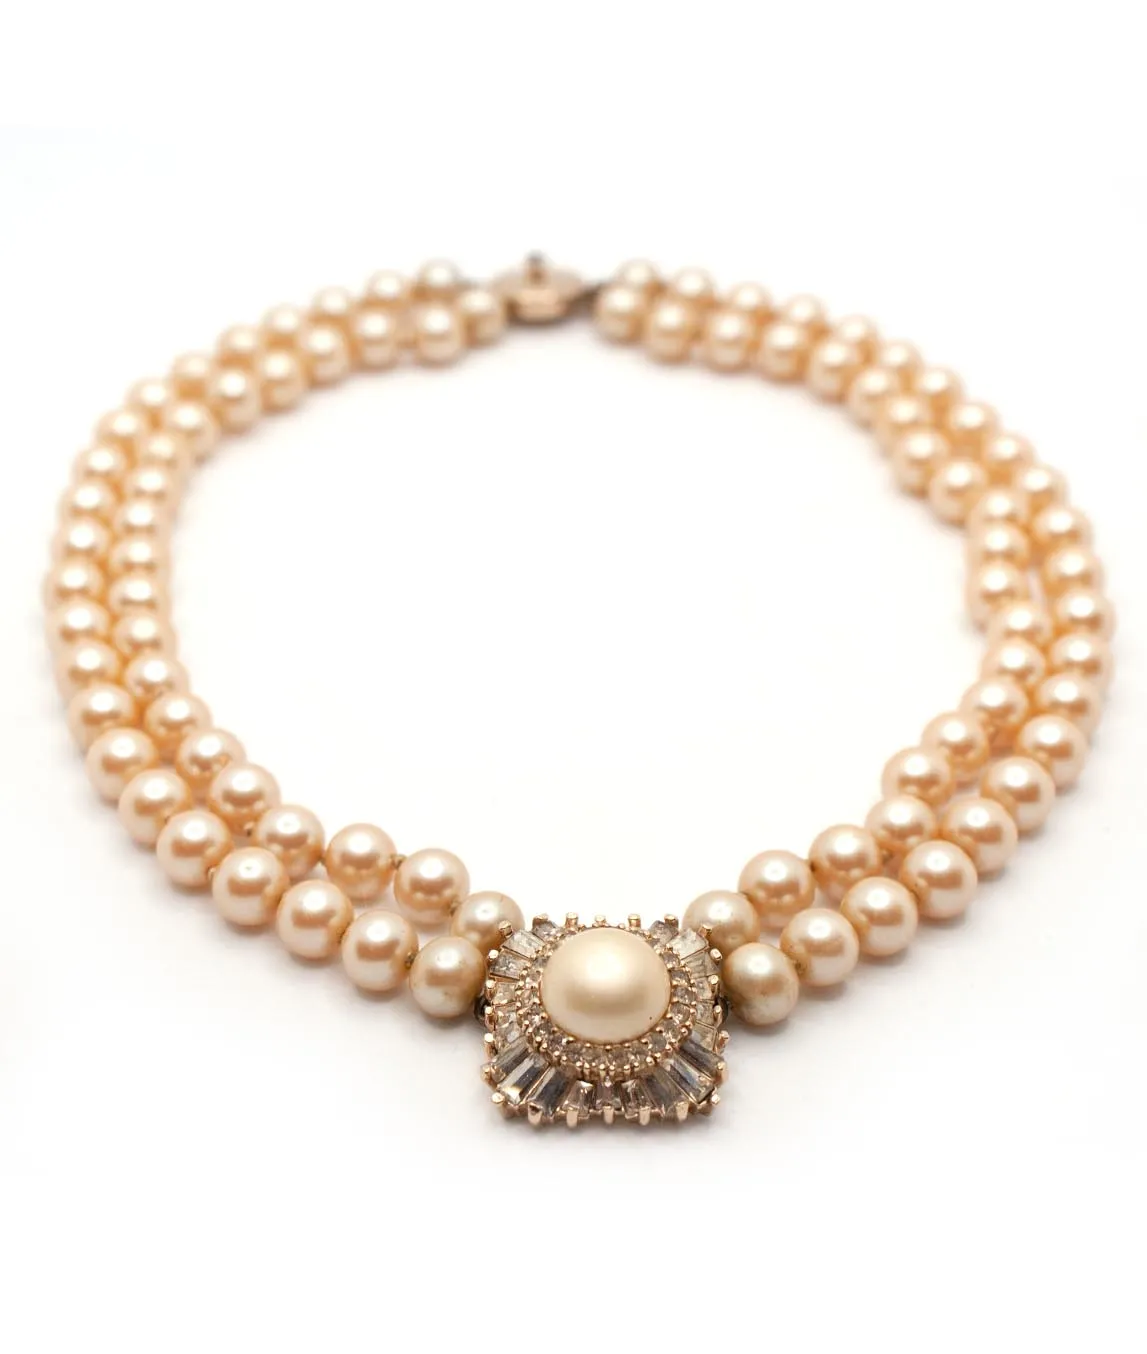 Panetta double strand faux pearl necklace with champagne beads and central pendant